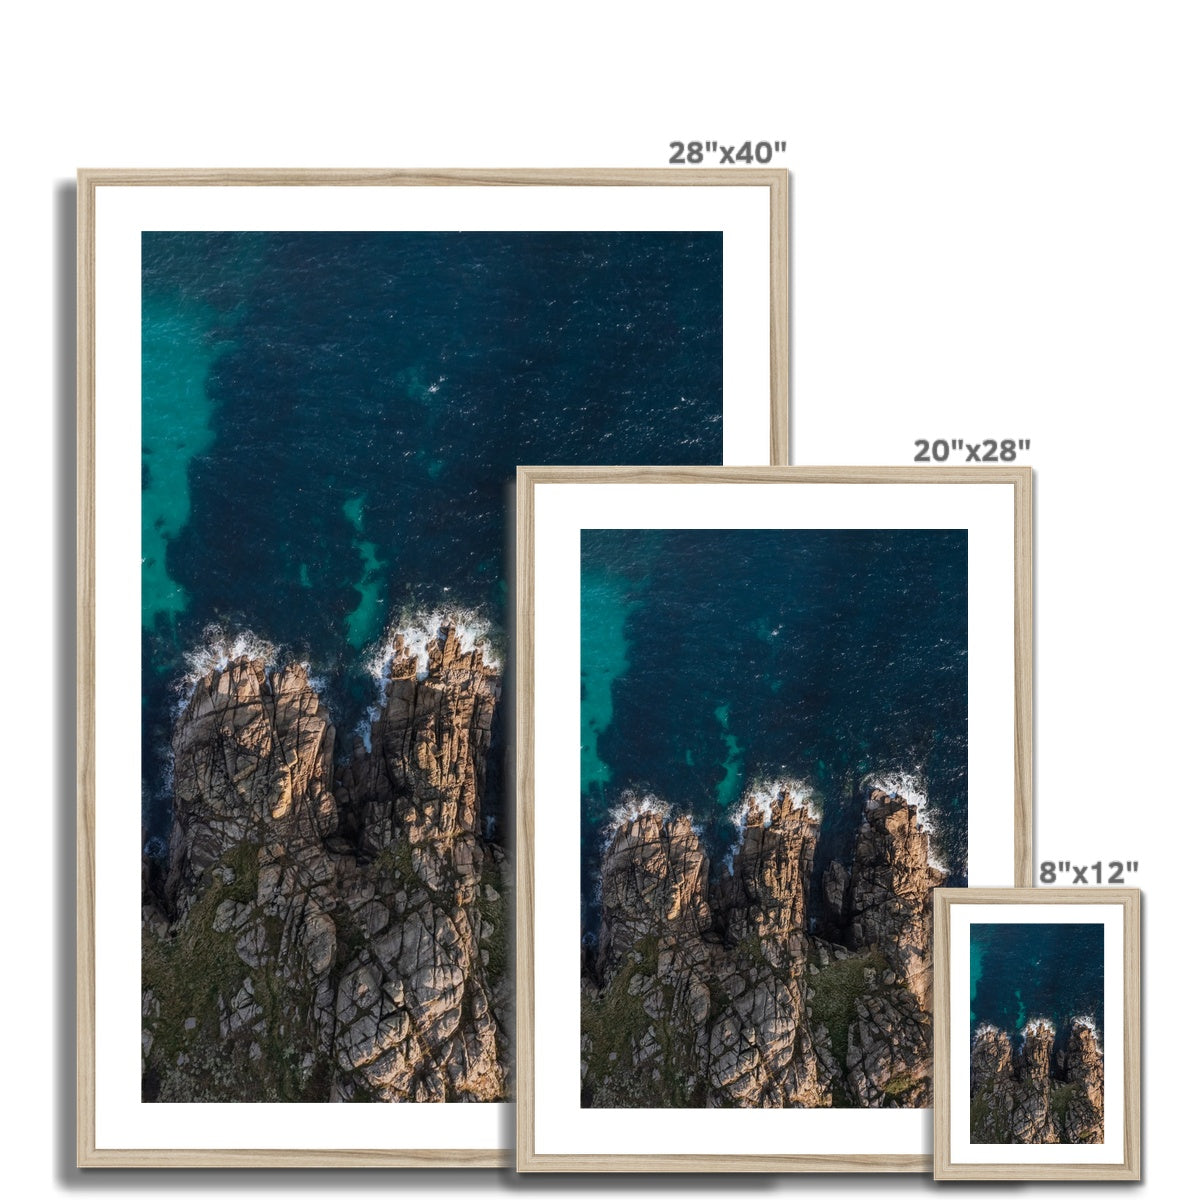 porthcurno rock fingers wooden frame sizes